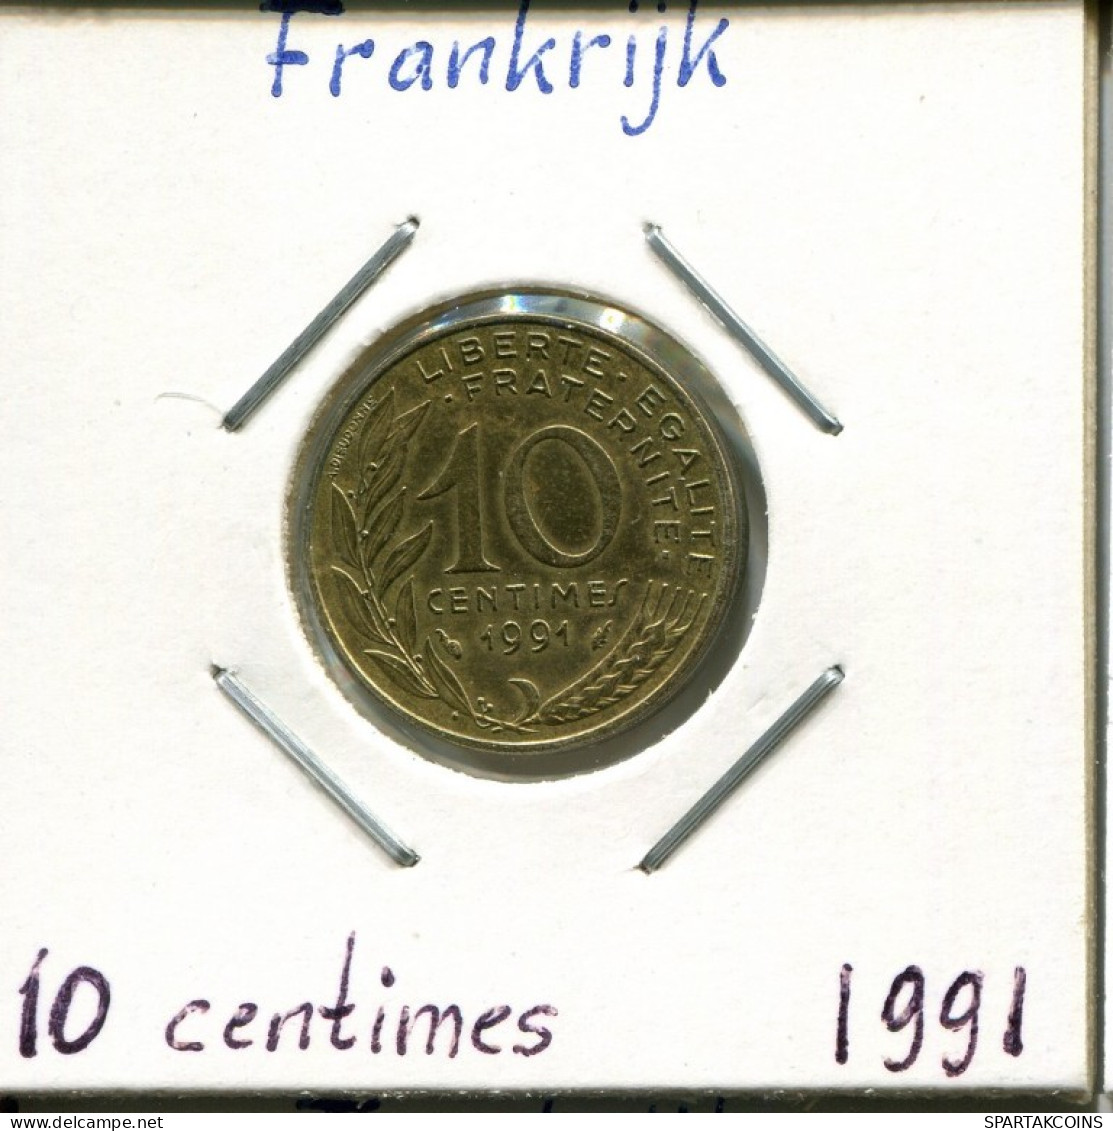 10 CENTIMES 1991 FRANCE Coin French Coin #AM145.U.A - 10 Centimes